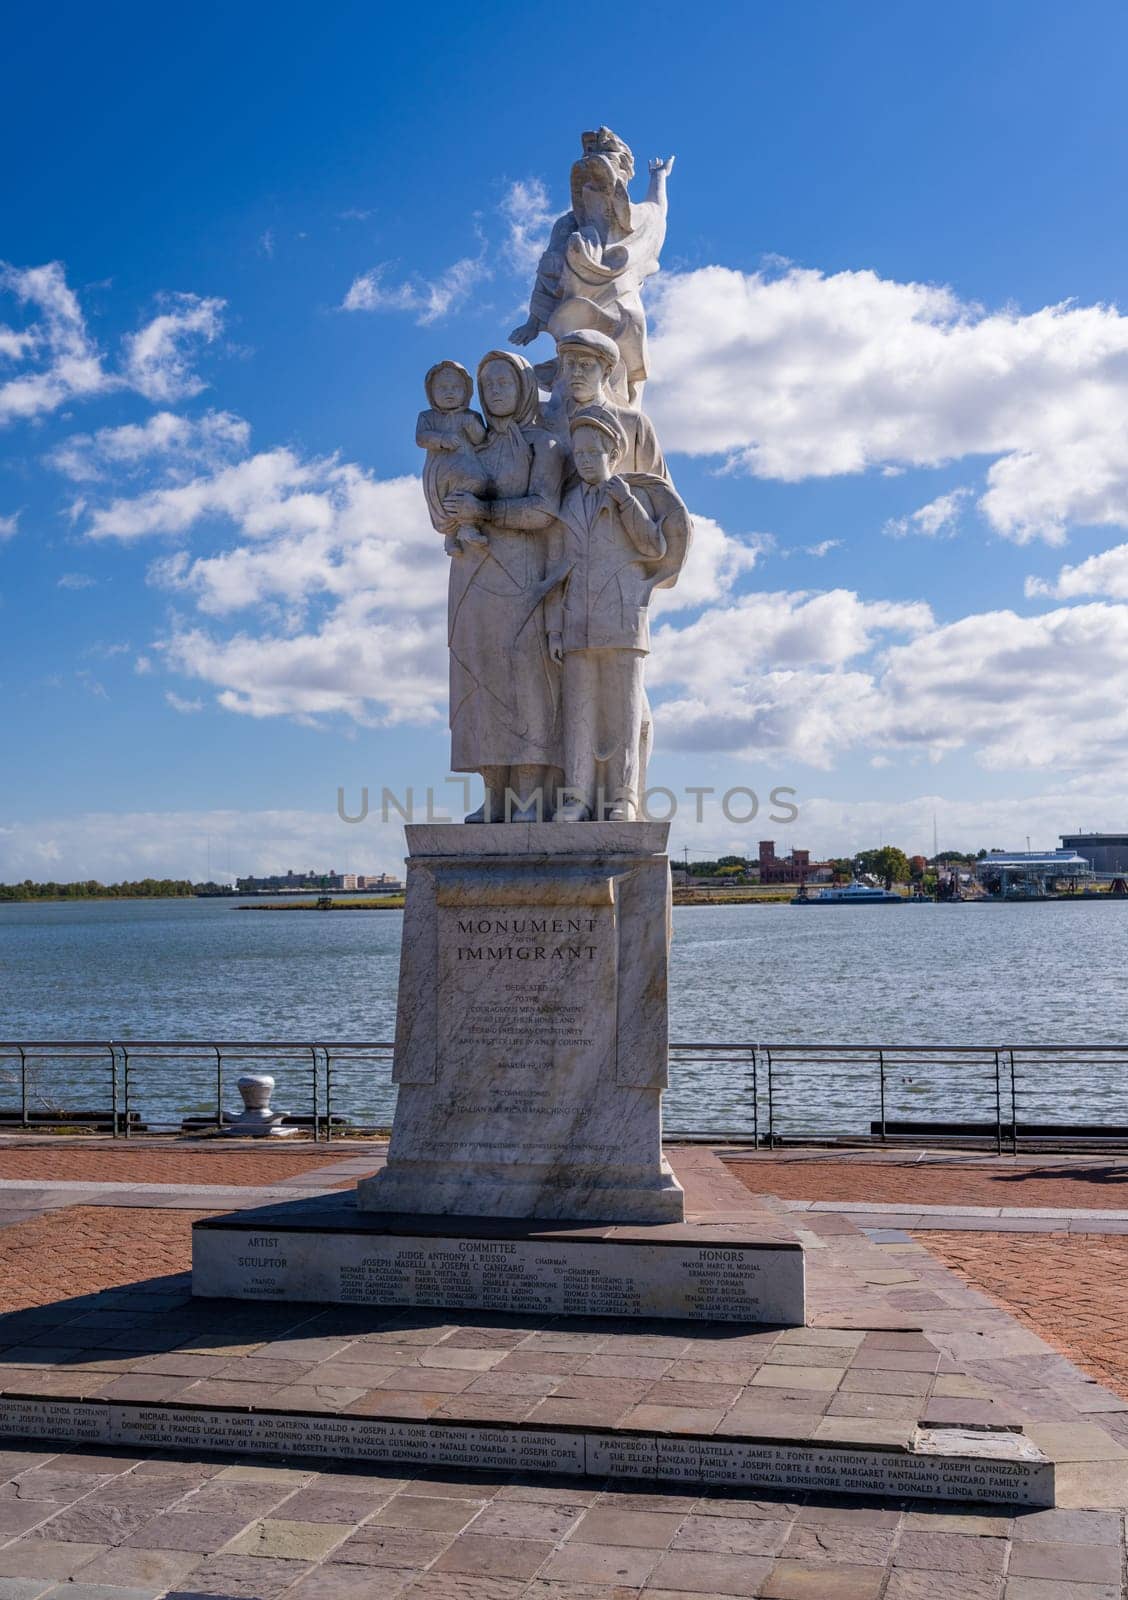 Monument to the Immigrant sculpture in New Orleans by steheap